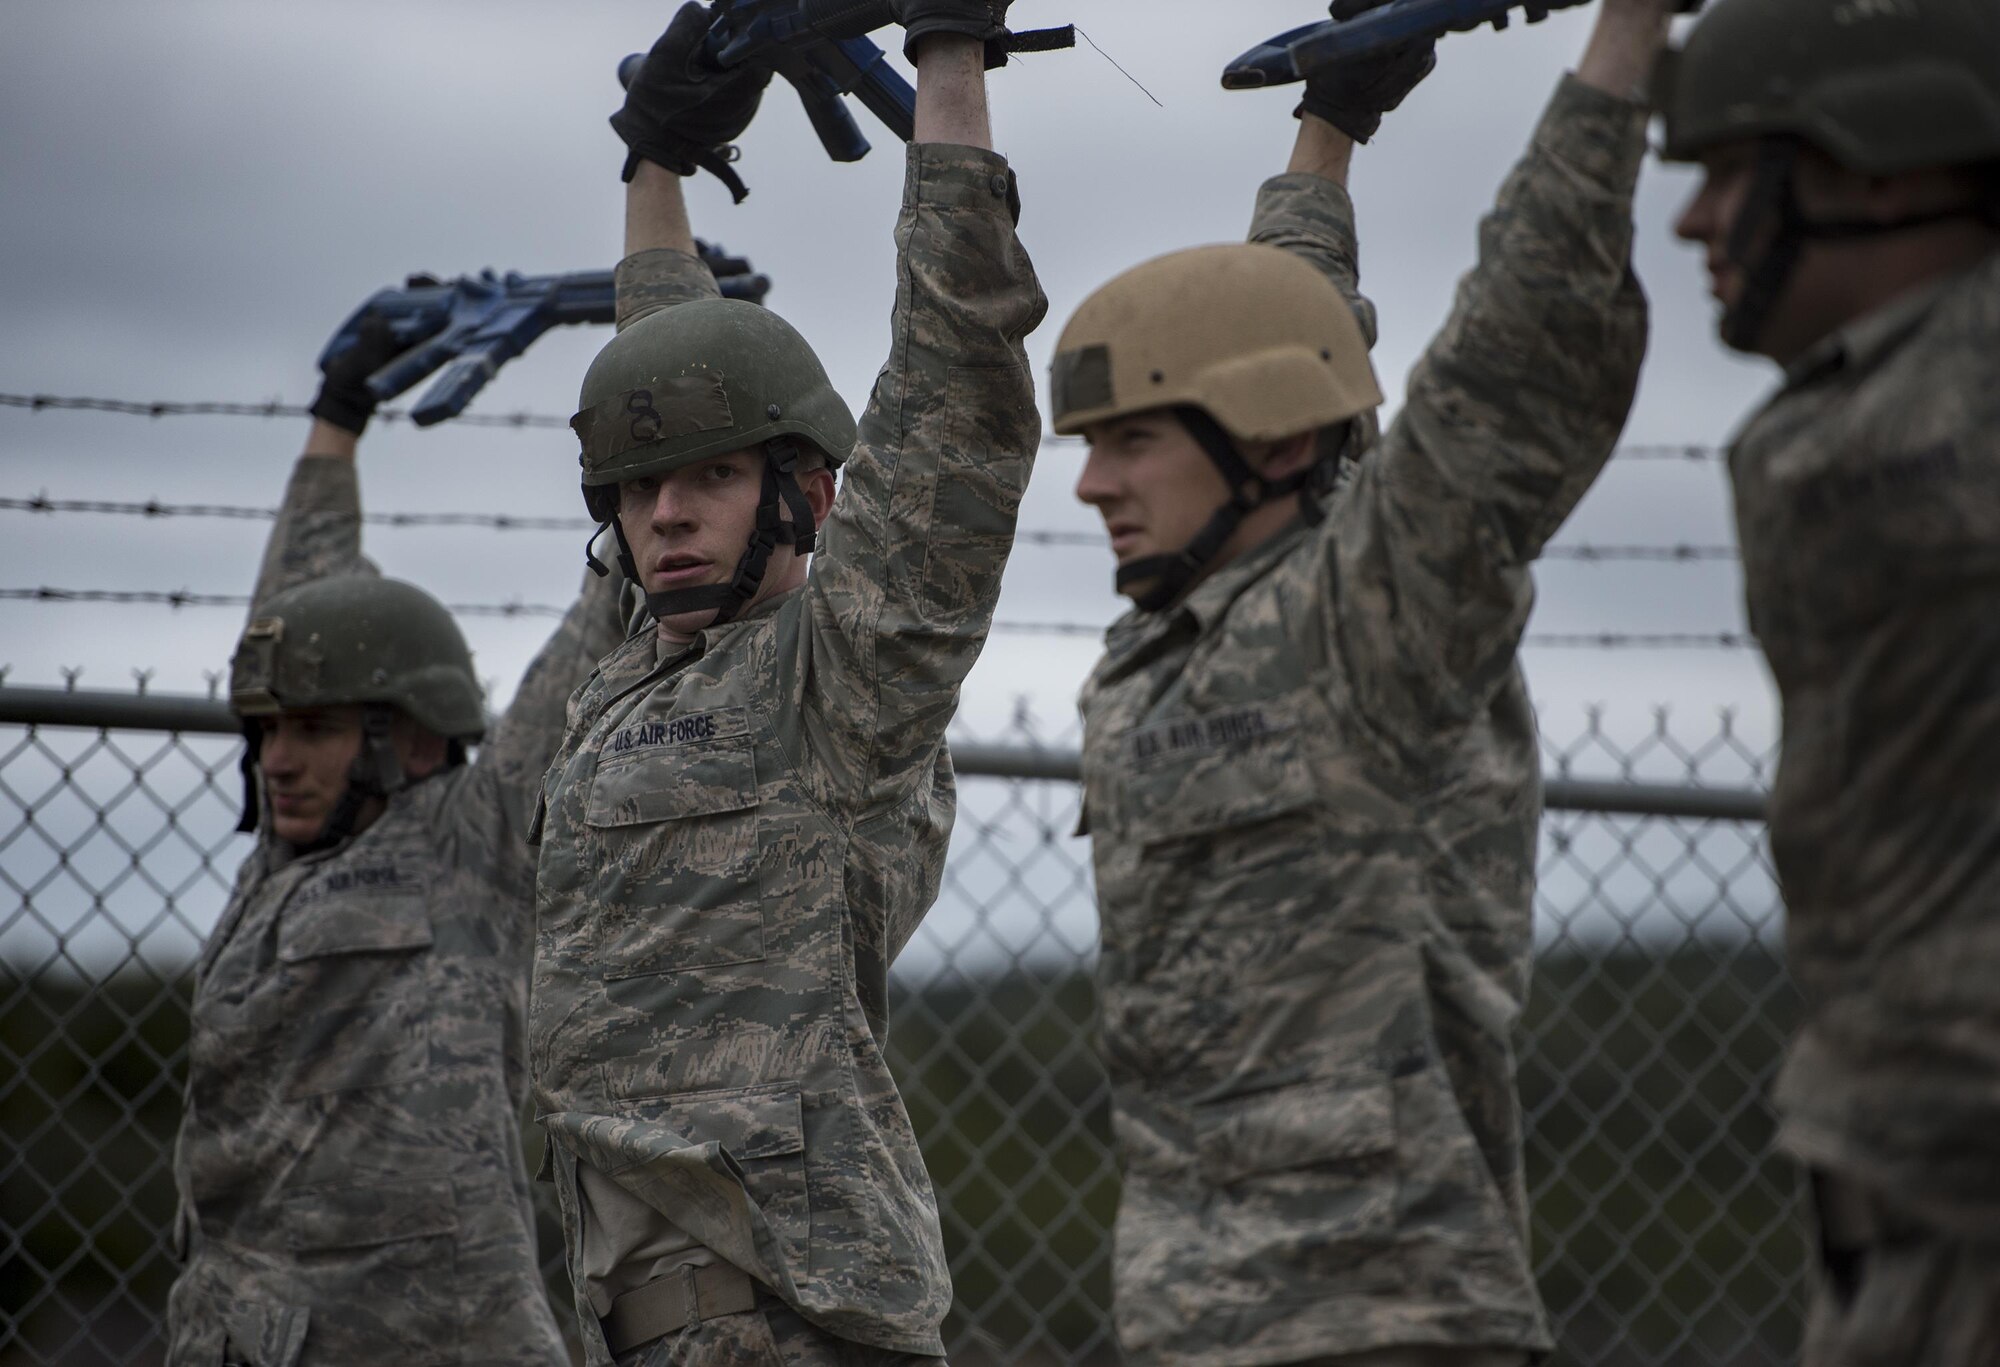 U.S. Air Force Academy cadets participate in a skills building exercise during the Air Liaison Officer Aptitude Assessment, Feb. 14, at Camp Bullis, Texas. The cadets were divided into two groups for the tasked obstacle portion of the assessment, leaving the other group time to workout. (U.S. Air Force photo by Tech. Sgt. Zachary Wolf)